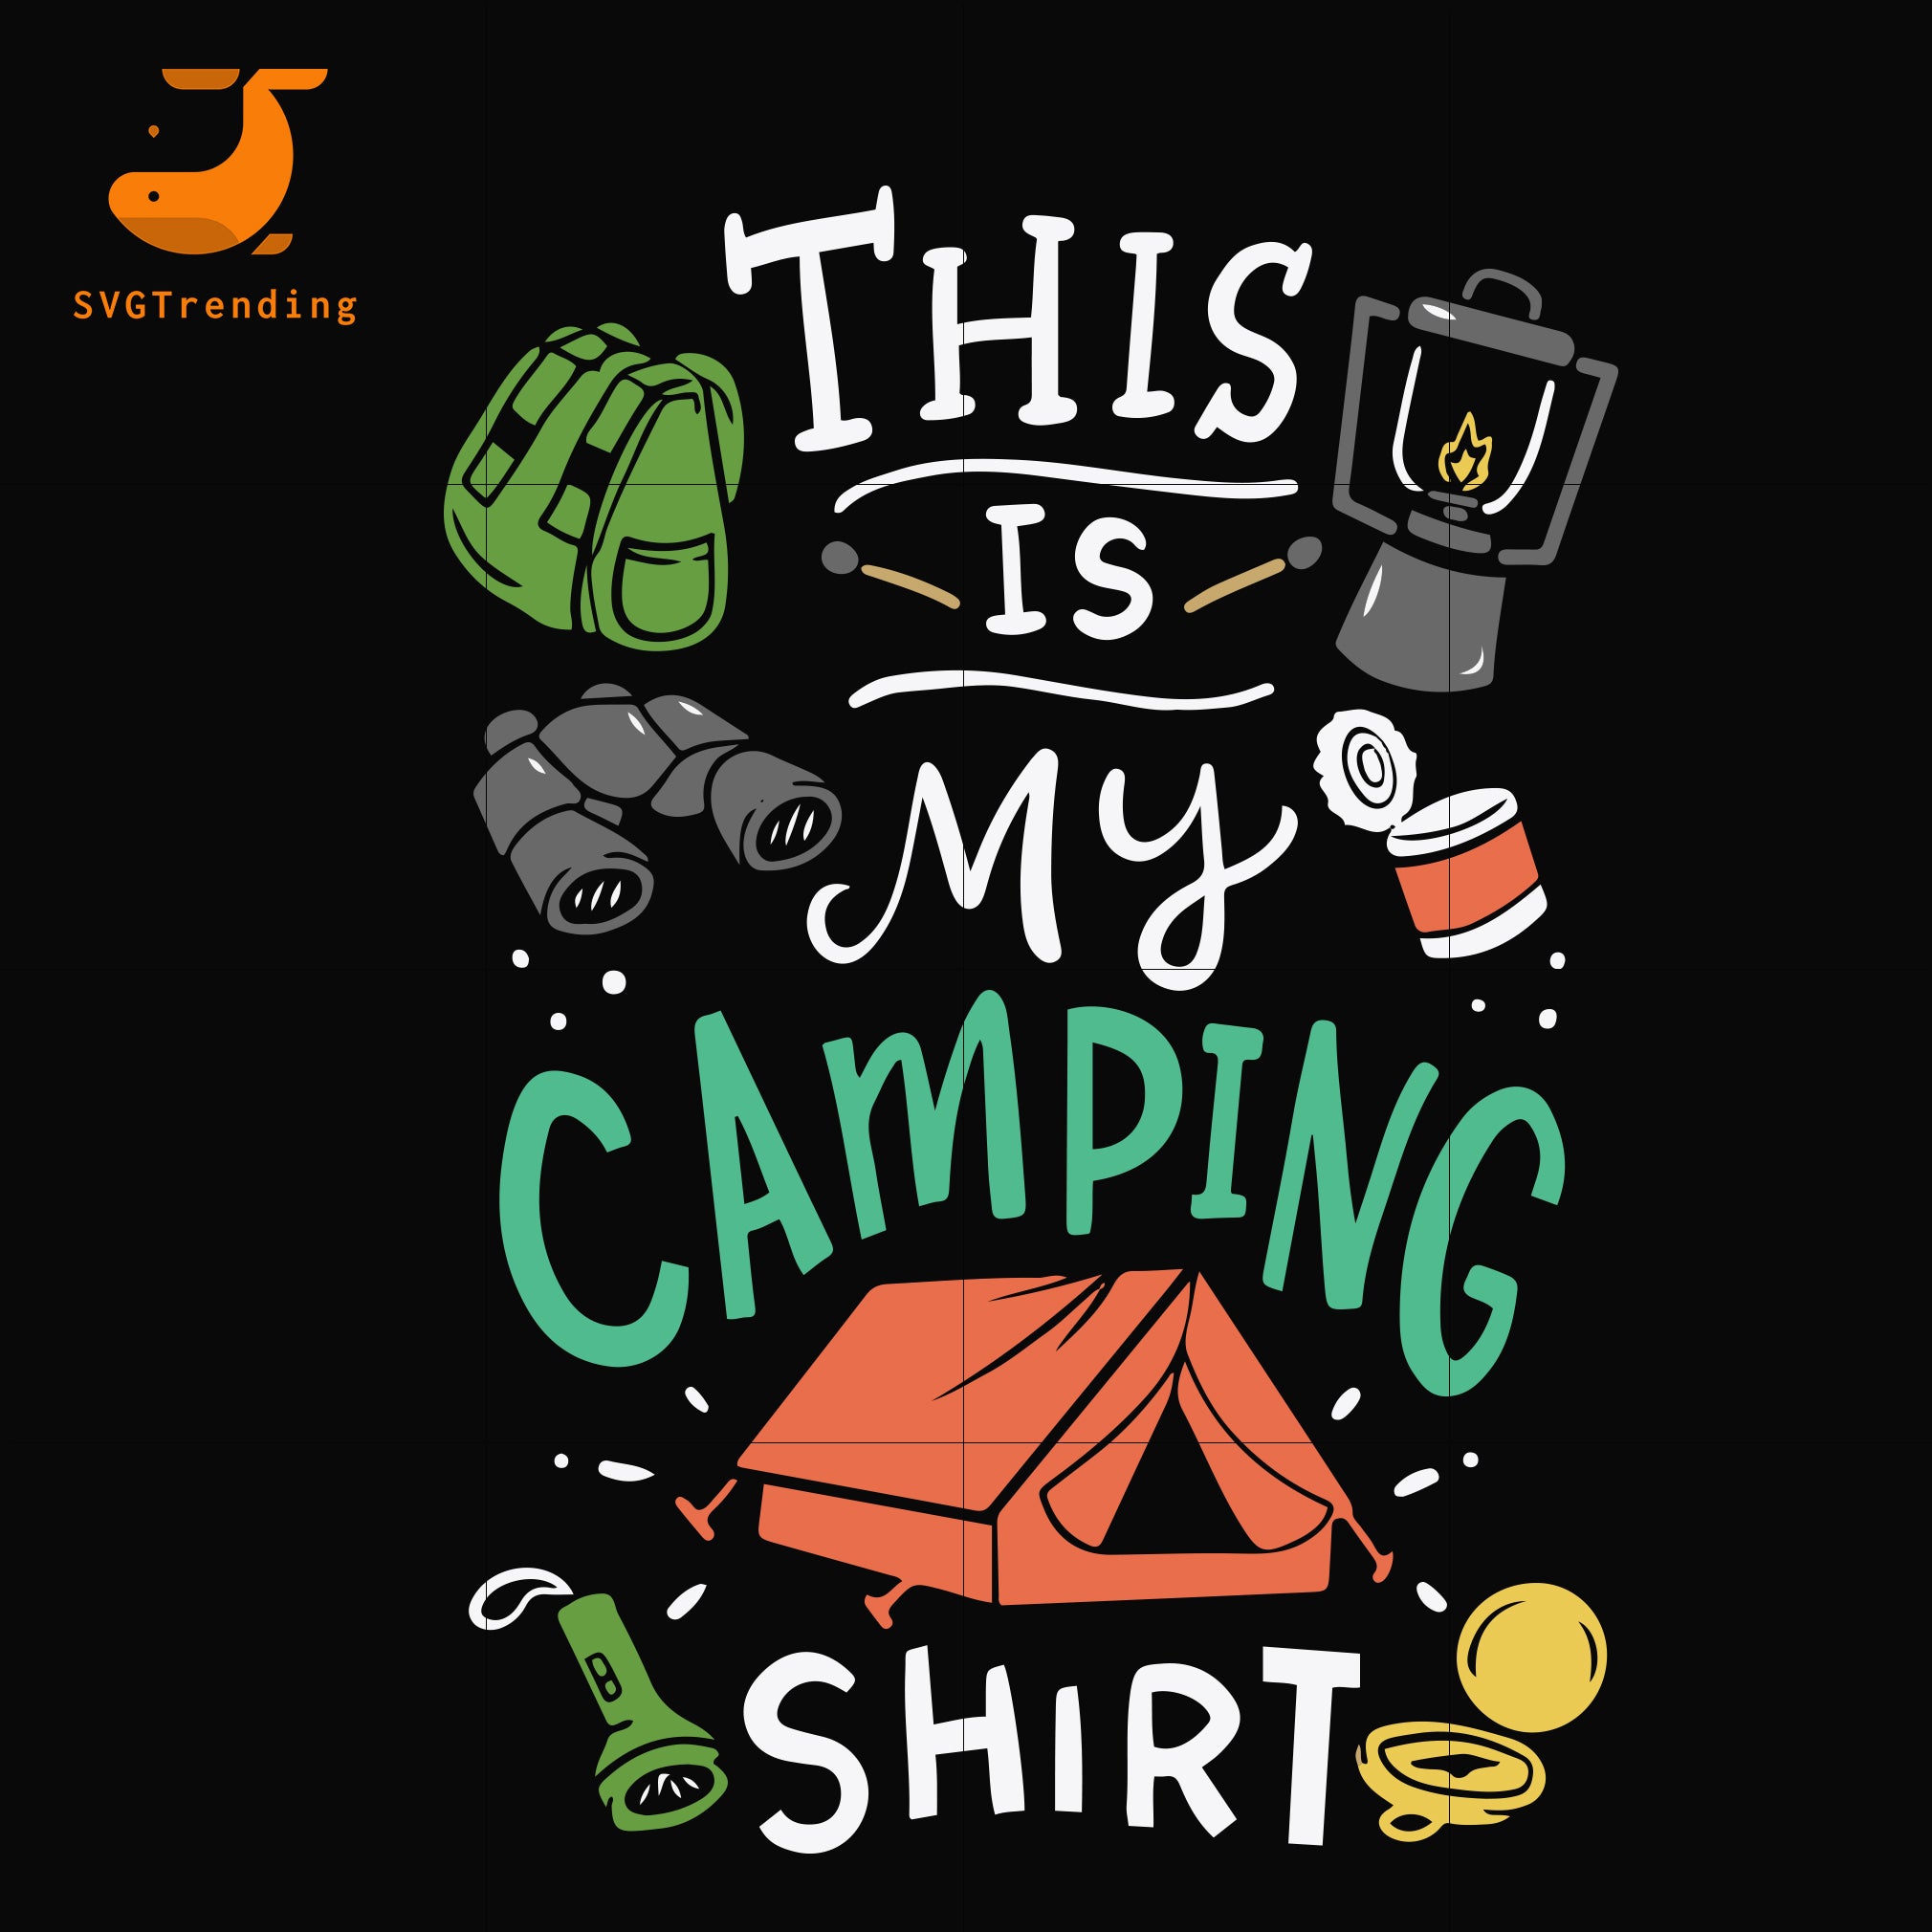 Download This Is My Camping Shirt Svg Png Dxf Eps Digital File Cmp033 Svgtrending